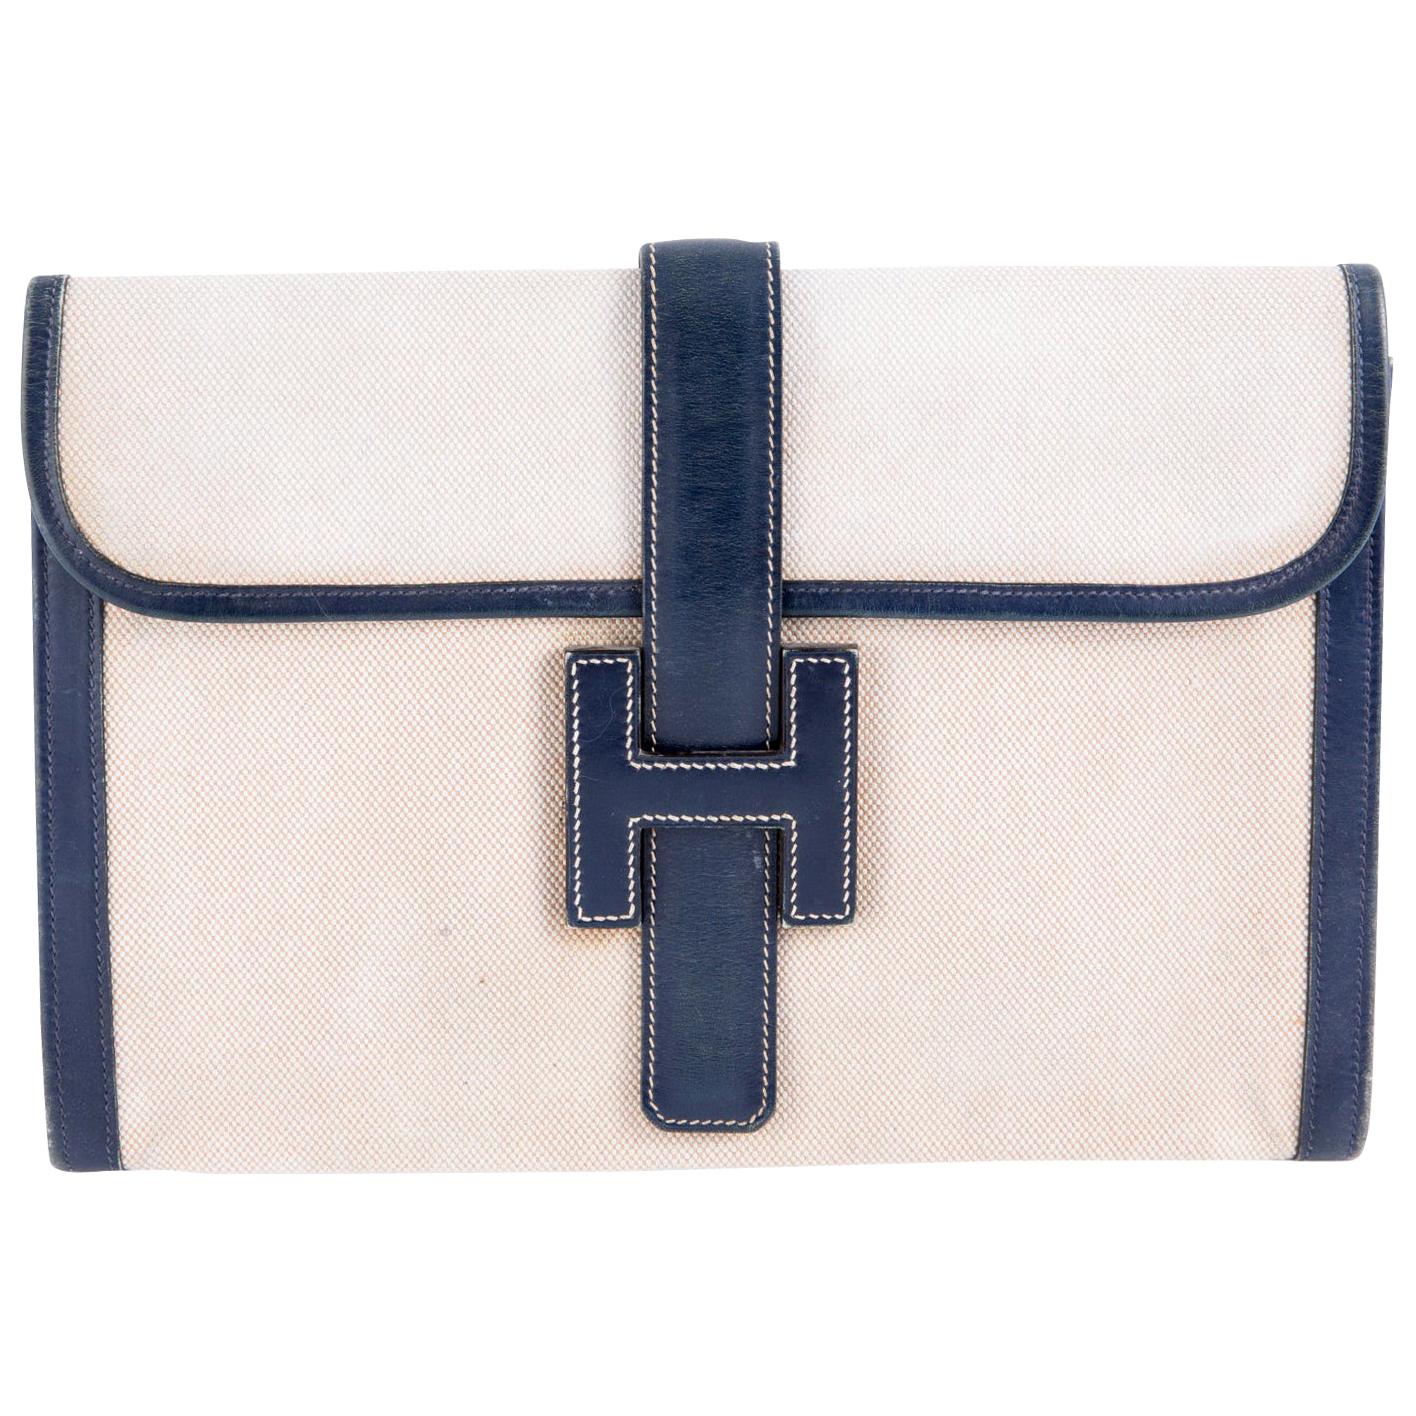 Hermes Jige Clutch - New in Box - The Consignment Cafe